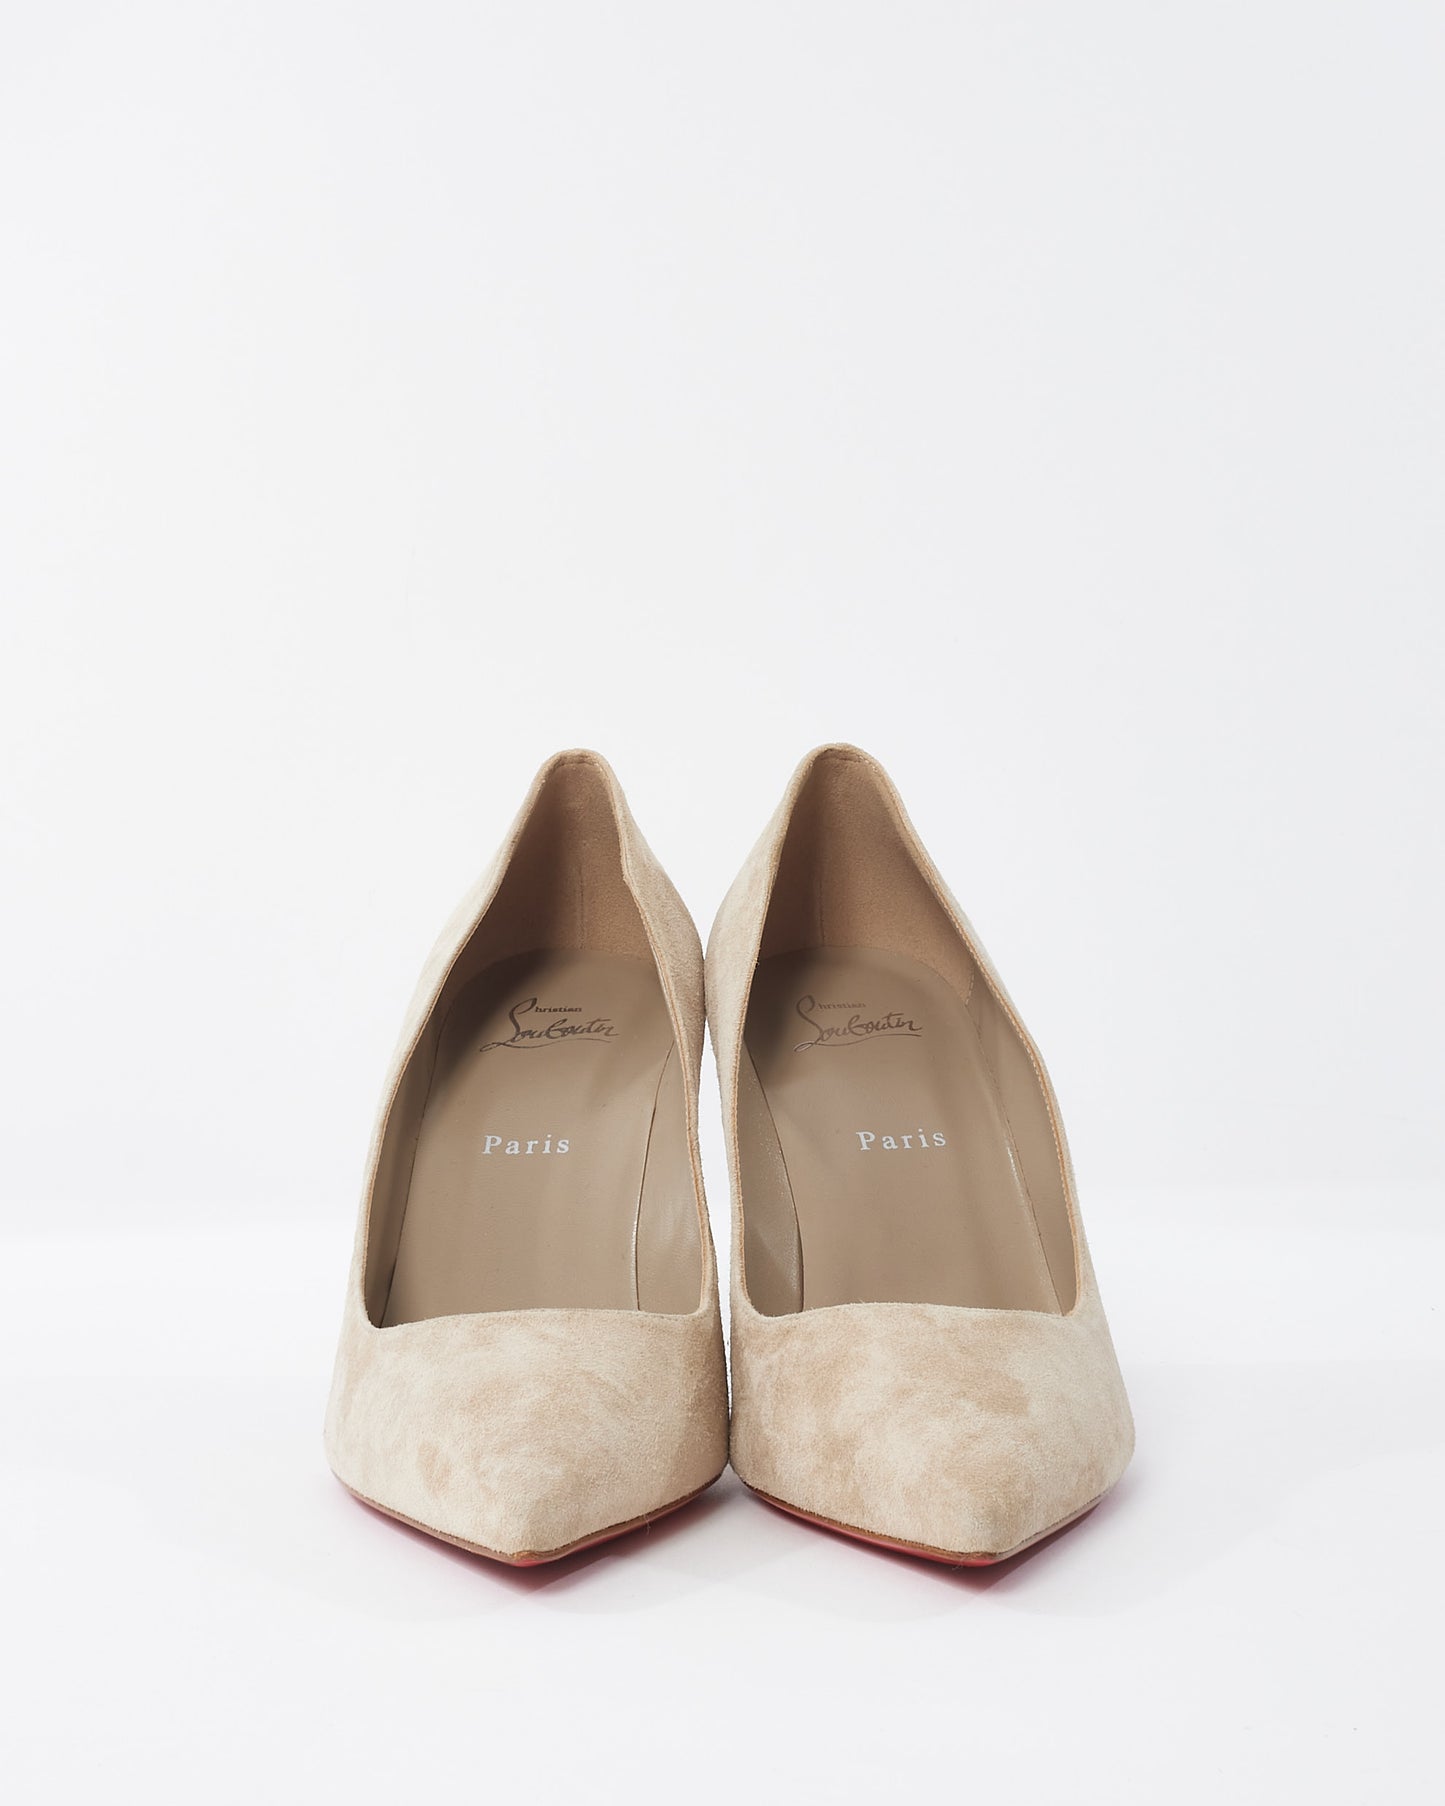 Christian Louboutin Beige Suede Kate 85mm Pumps - 41